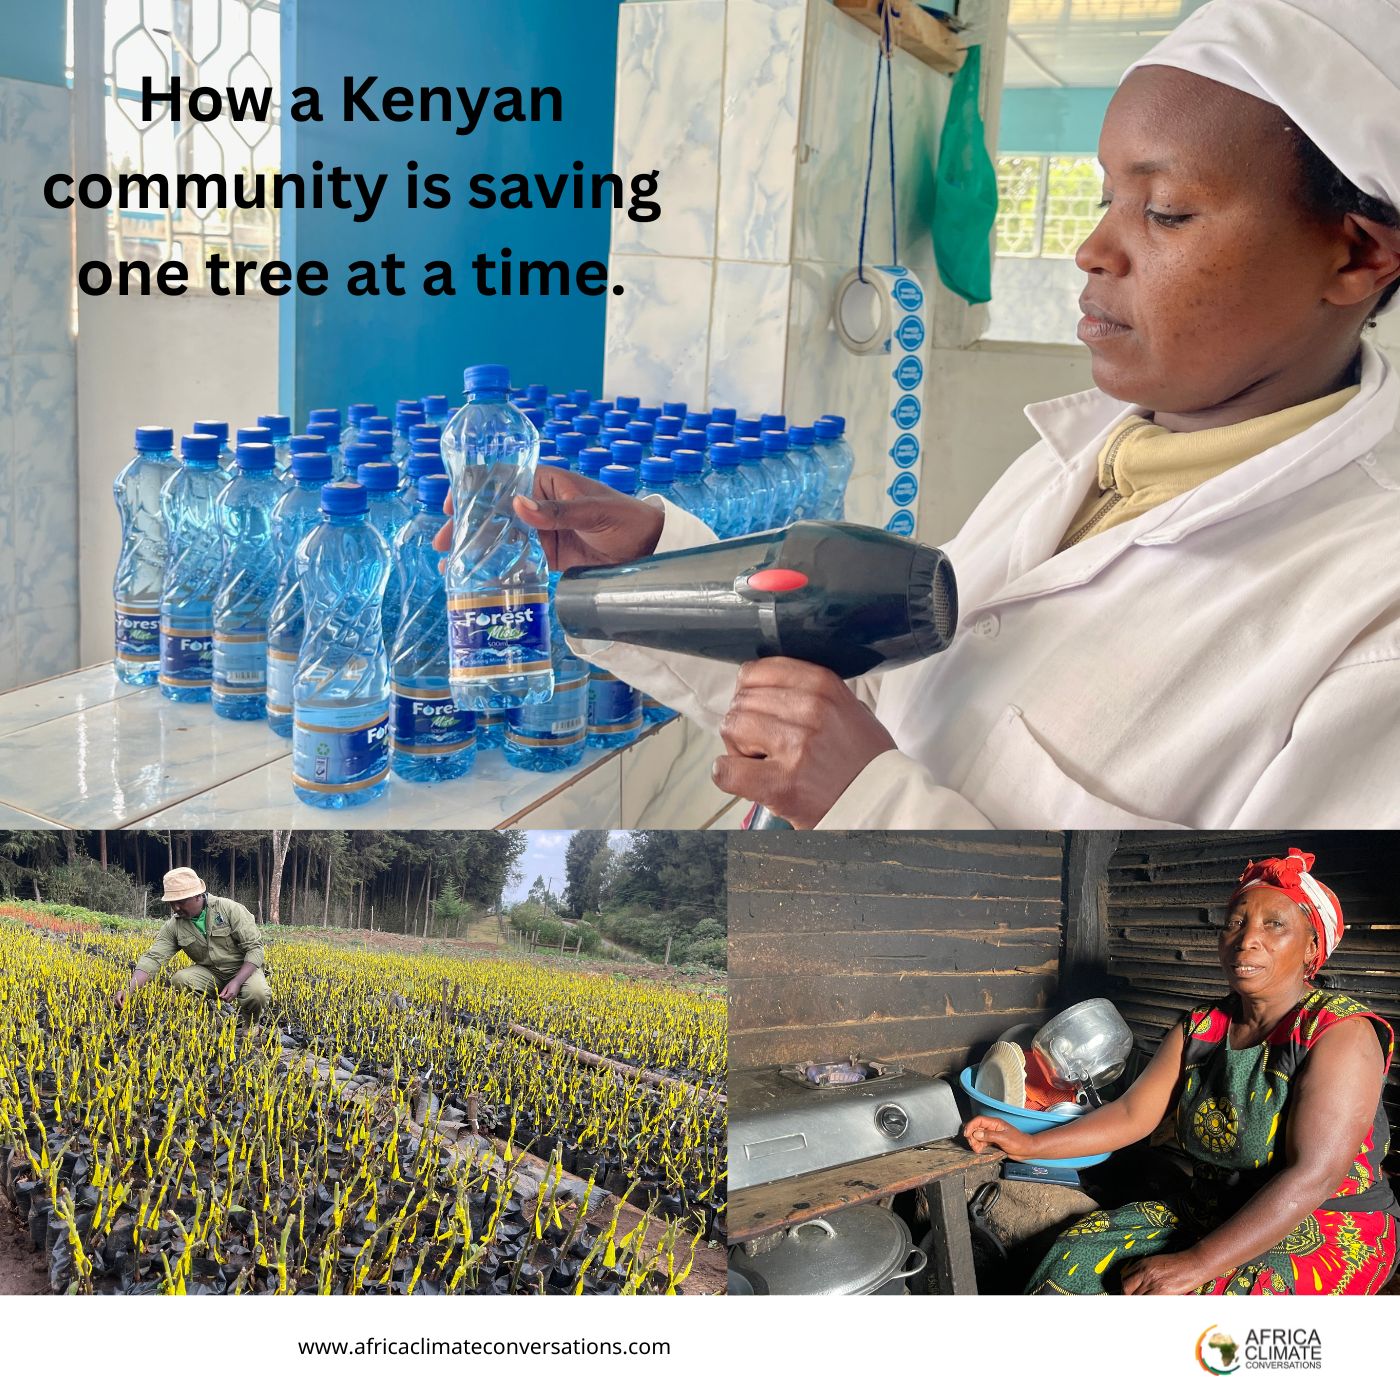 How a Kenyan community is saving one tree at a time.